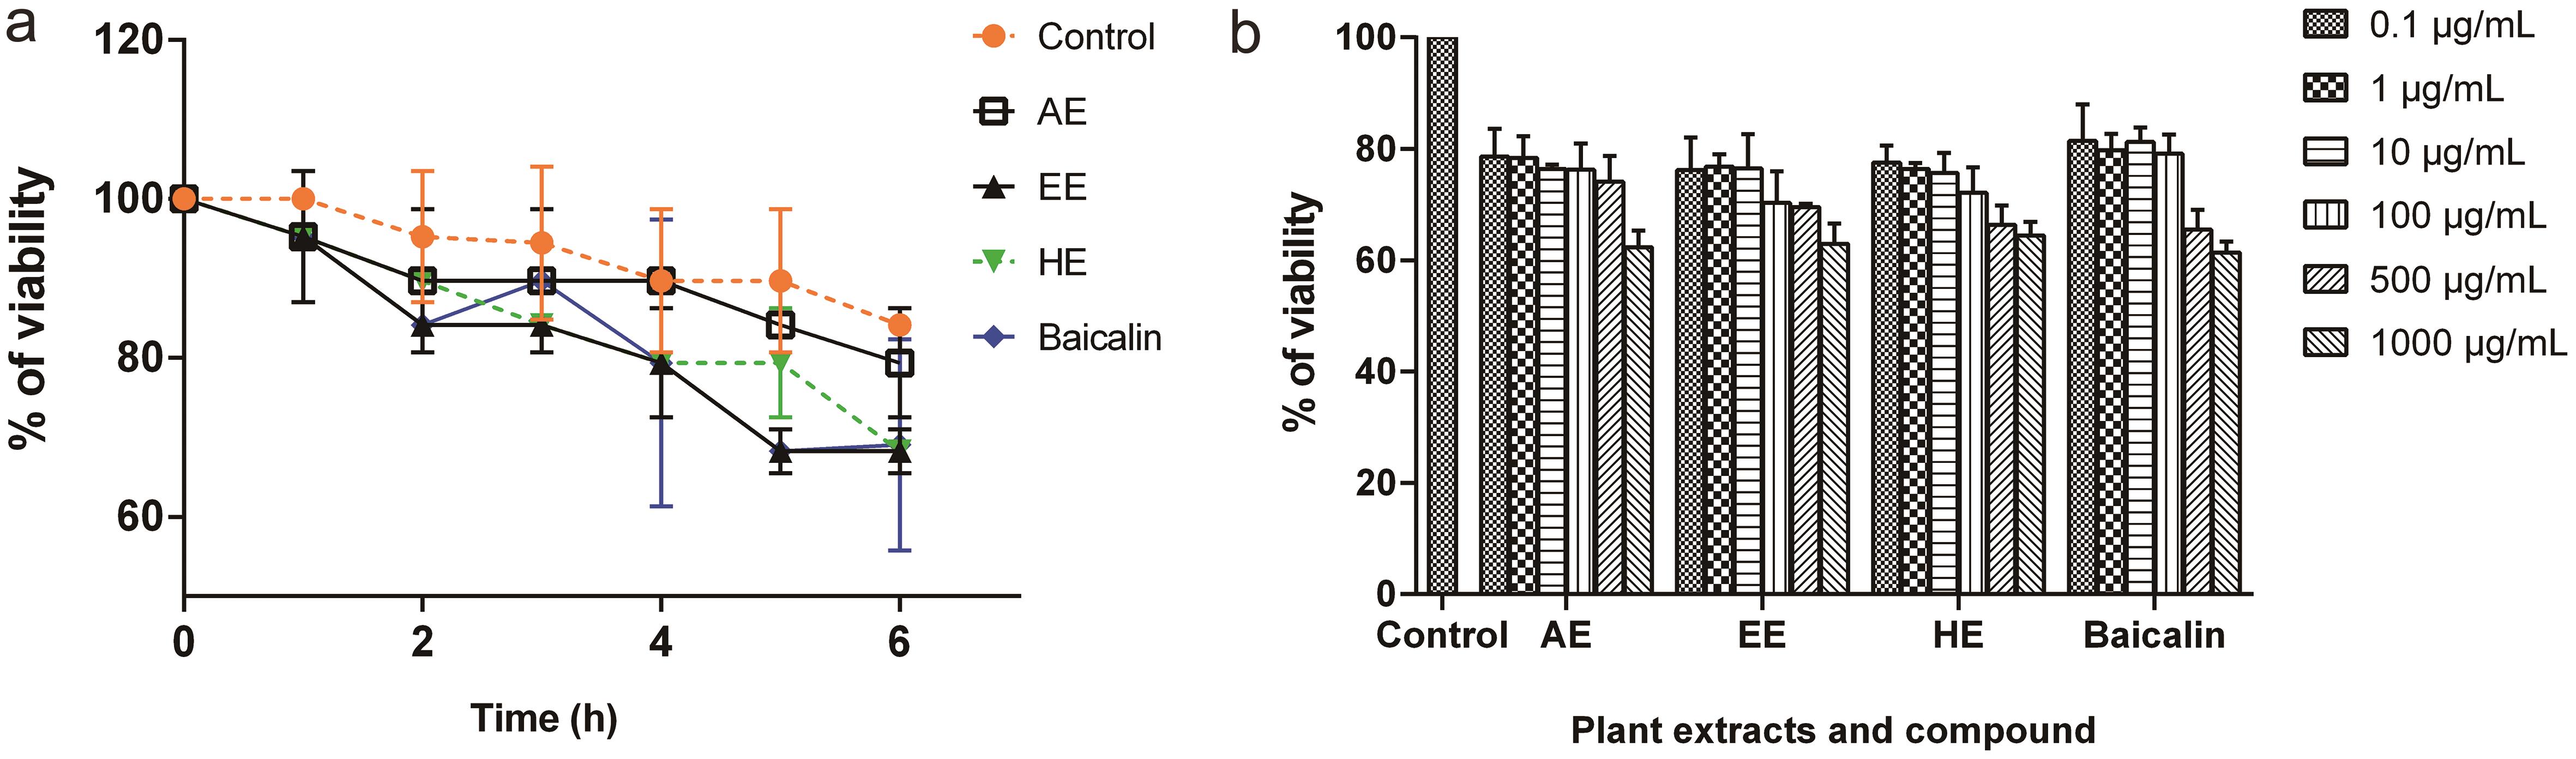 Viability of primary macrophages was slightly decreased by crude extracts of Codiaeum Variegatum stem.